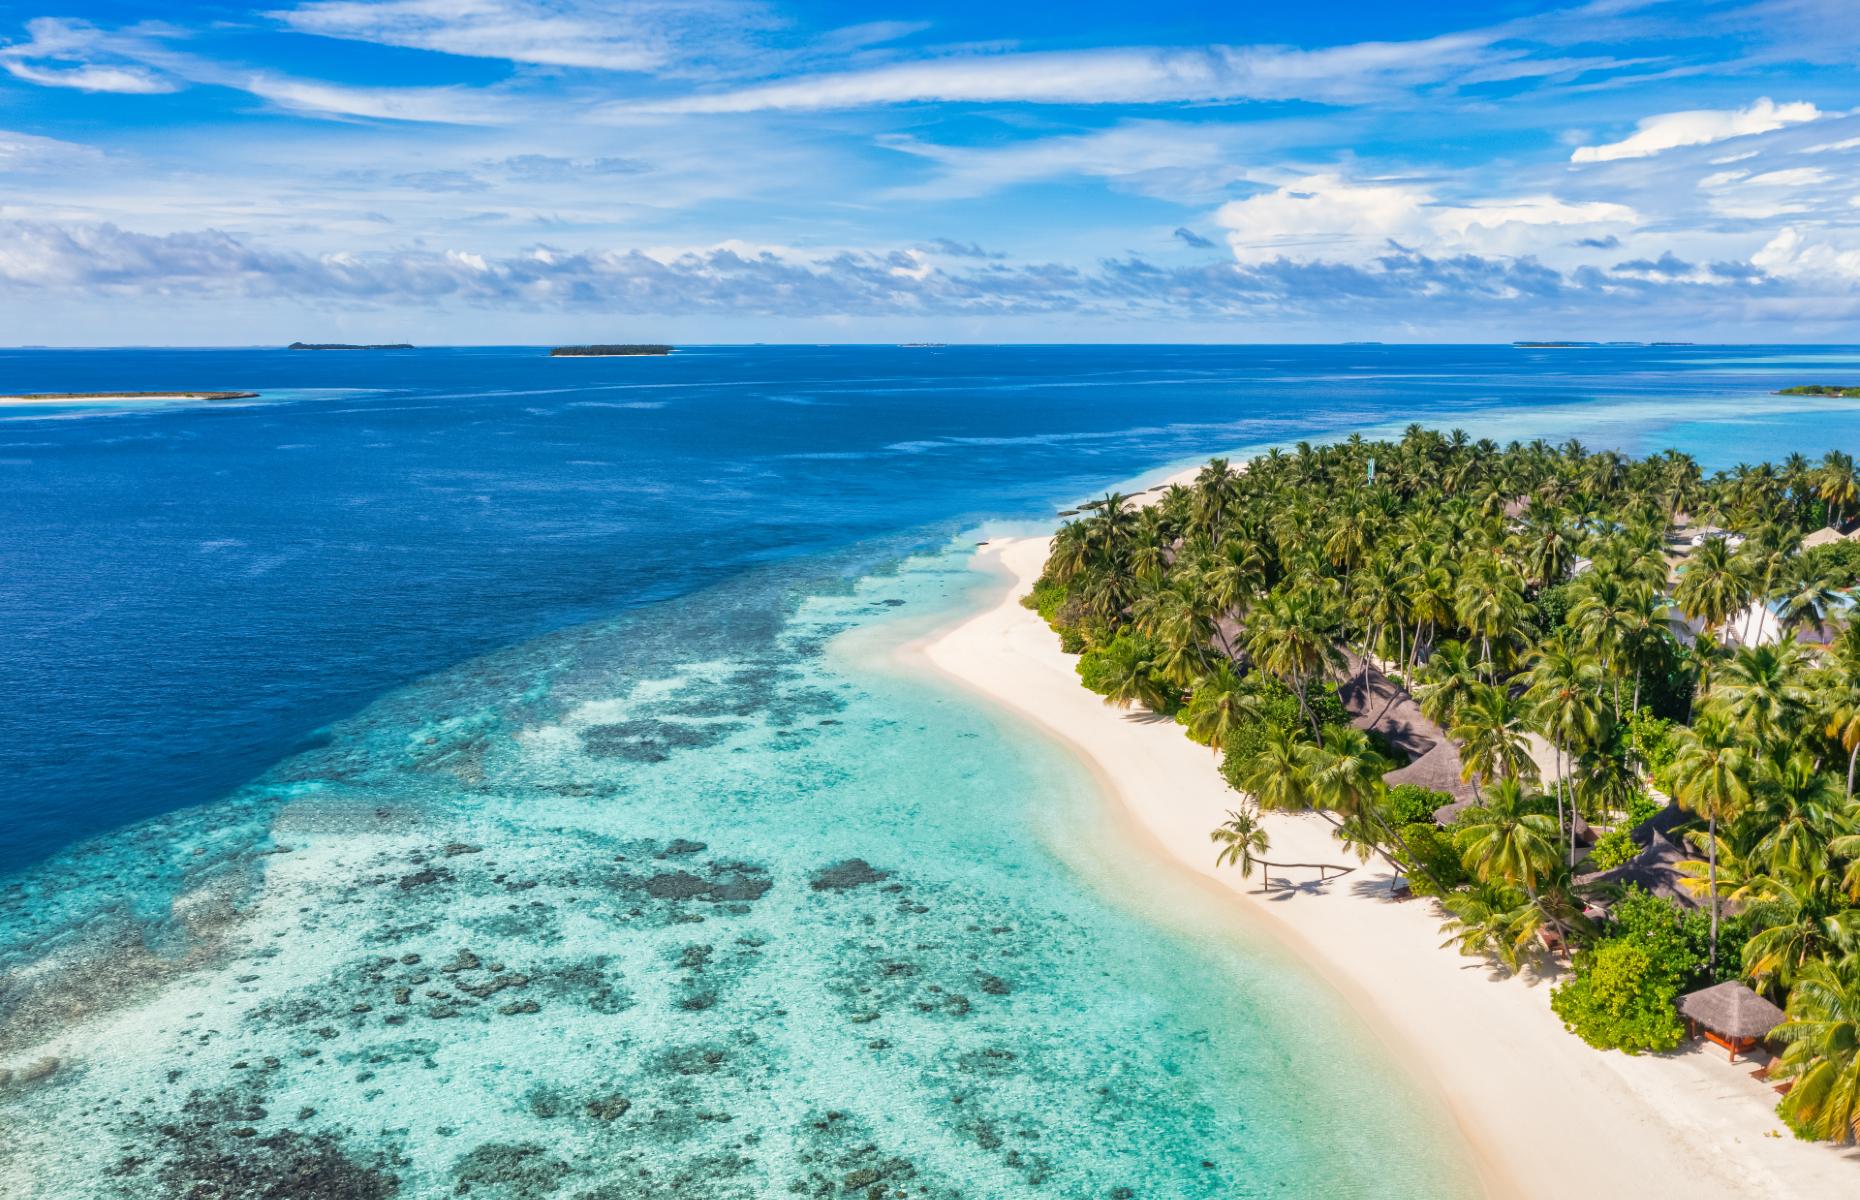 The paradise islands are on the frontlines of the climate crisis [Image: icemanphotos/Shutterstock]